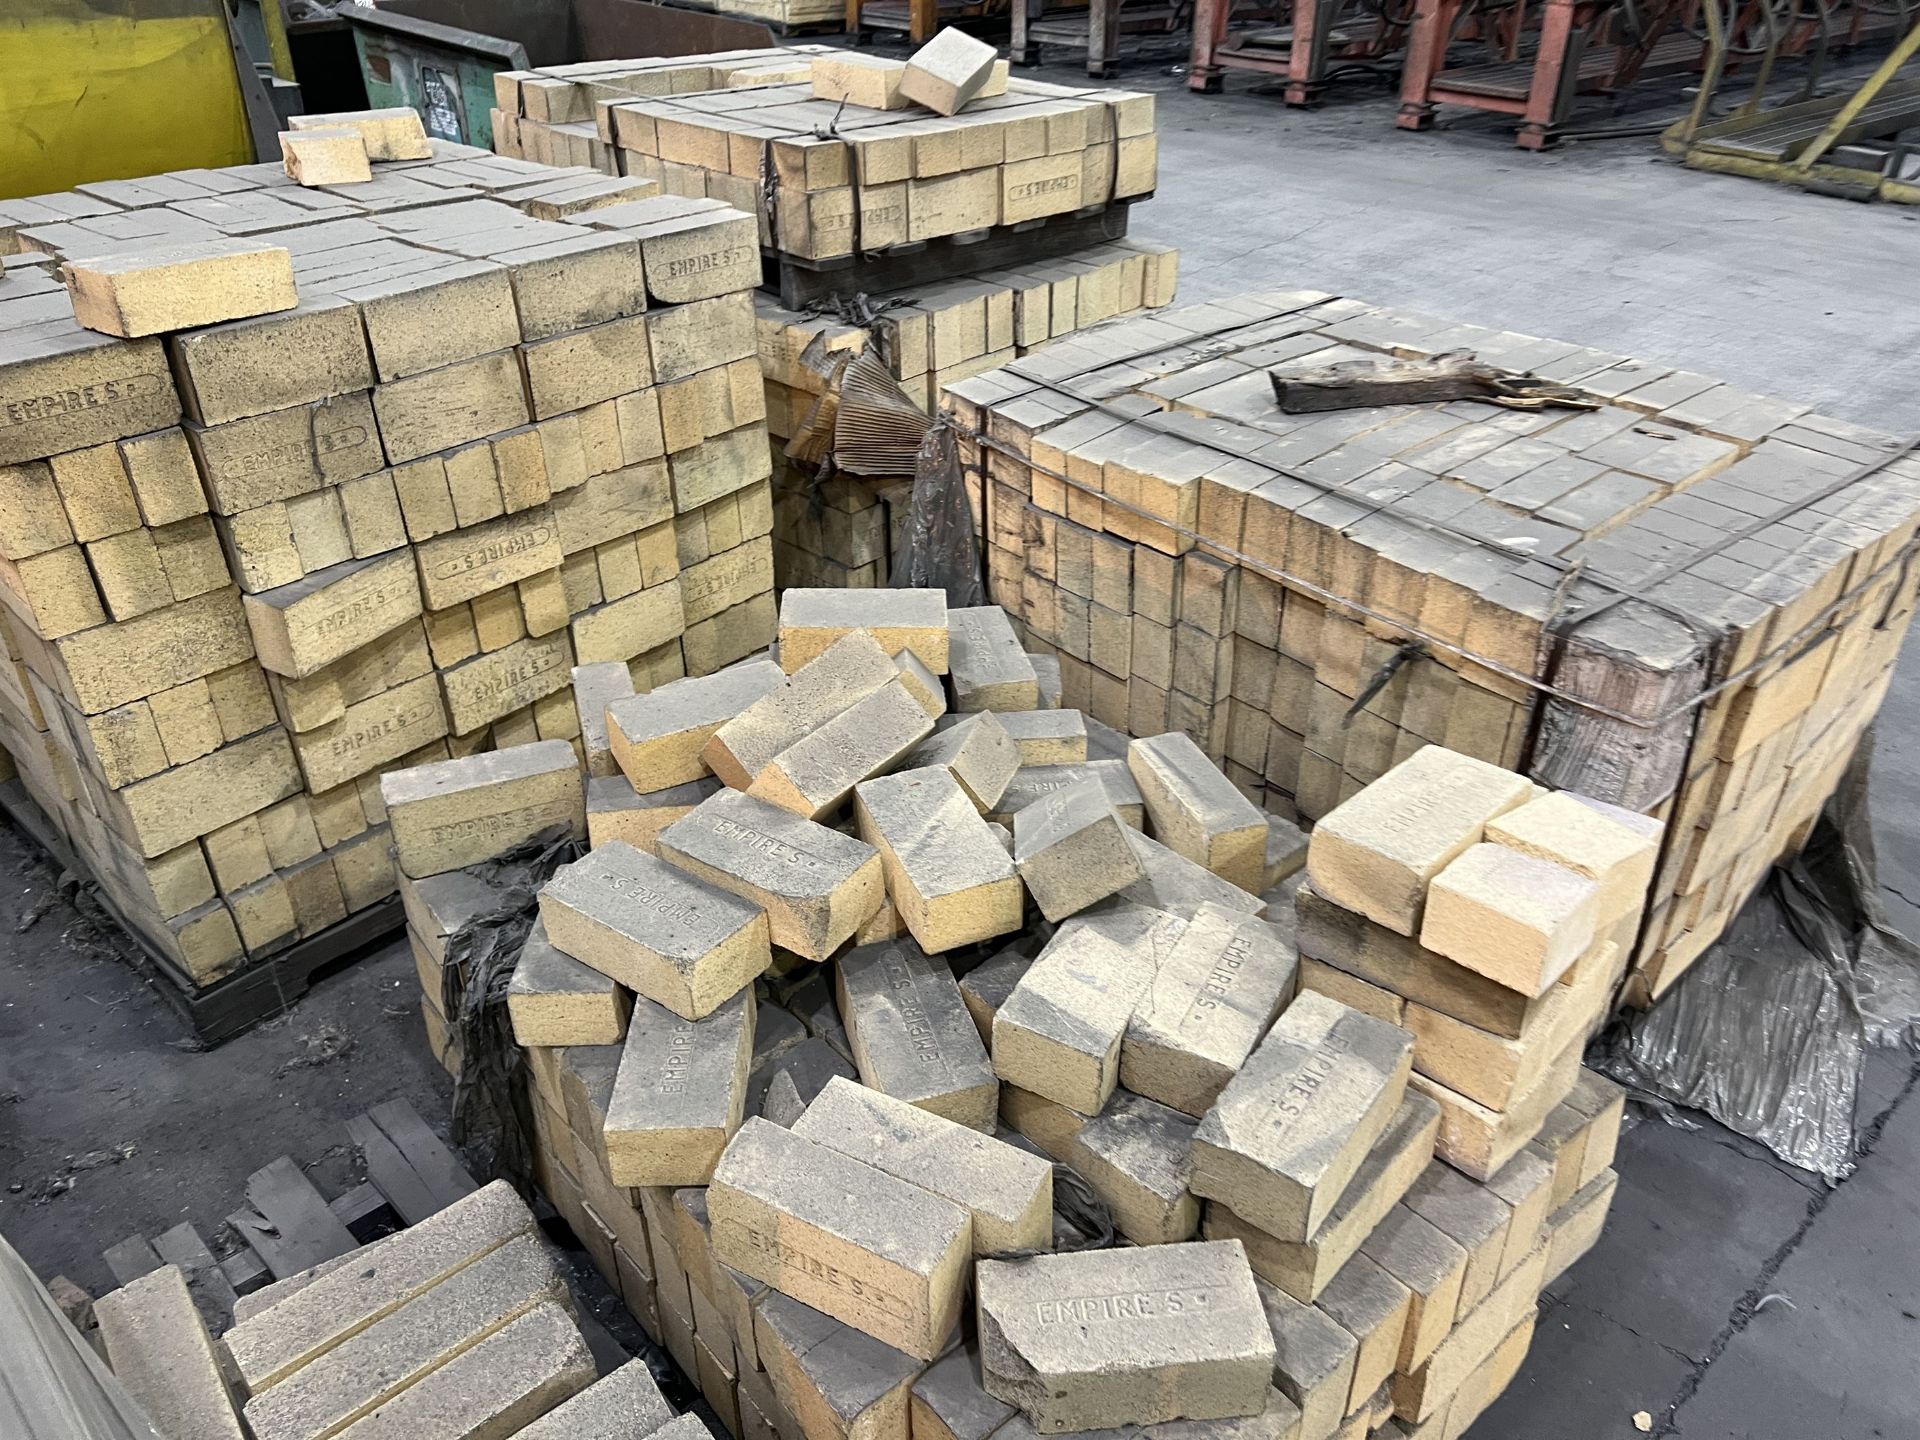 Lot of (9) Pallets of EMPIRE S Carbon Baking Straight Brick, 9" x 4.5" x 3" Bricks - Image 5 of 5